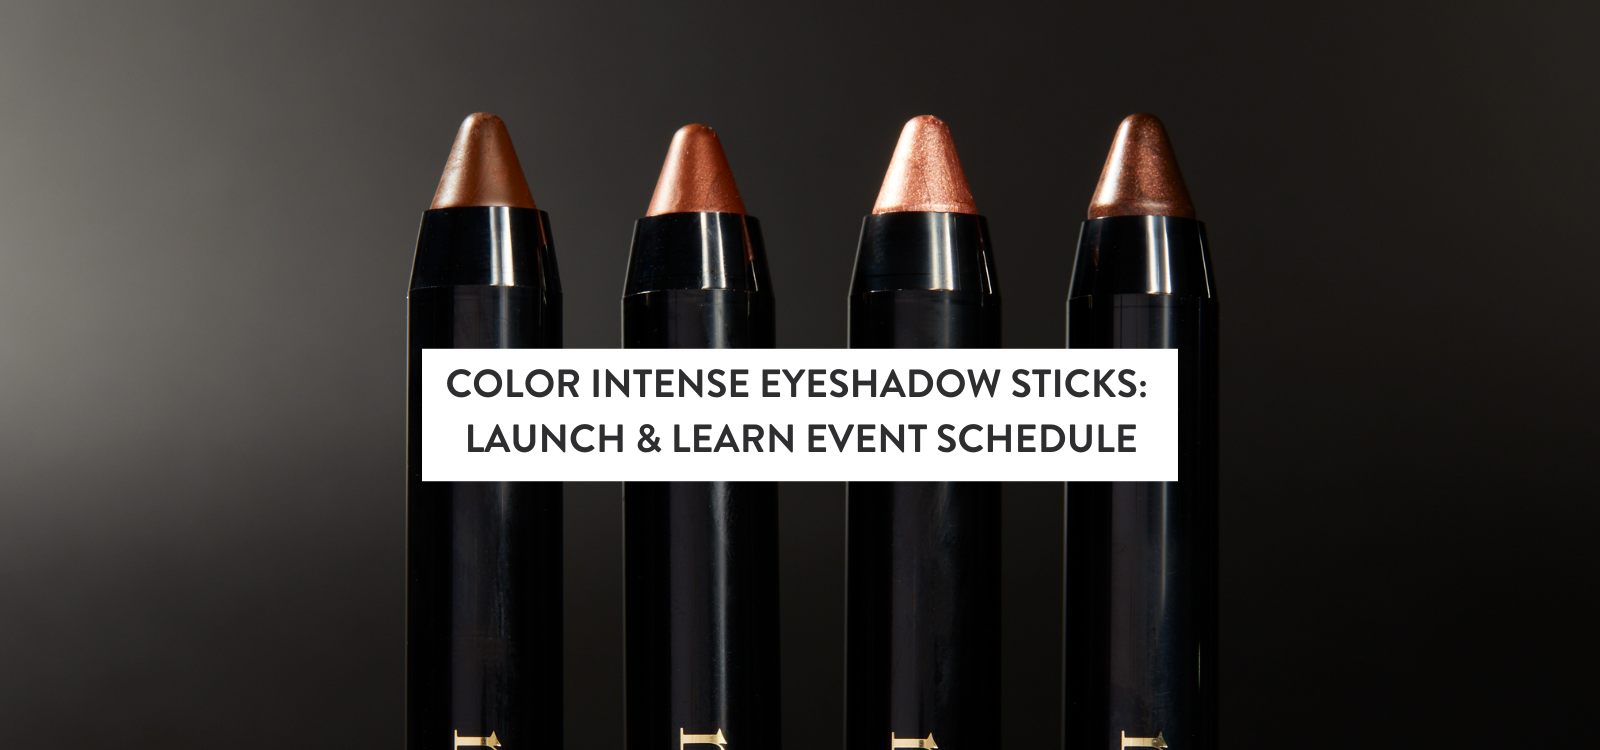 Color Intense Eyeshadow Sticks: Launch & Learn Event Schedule